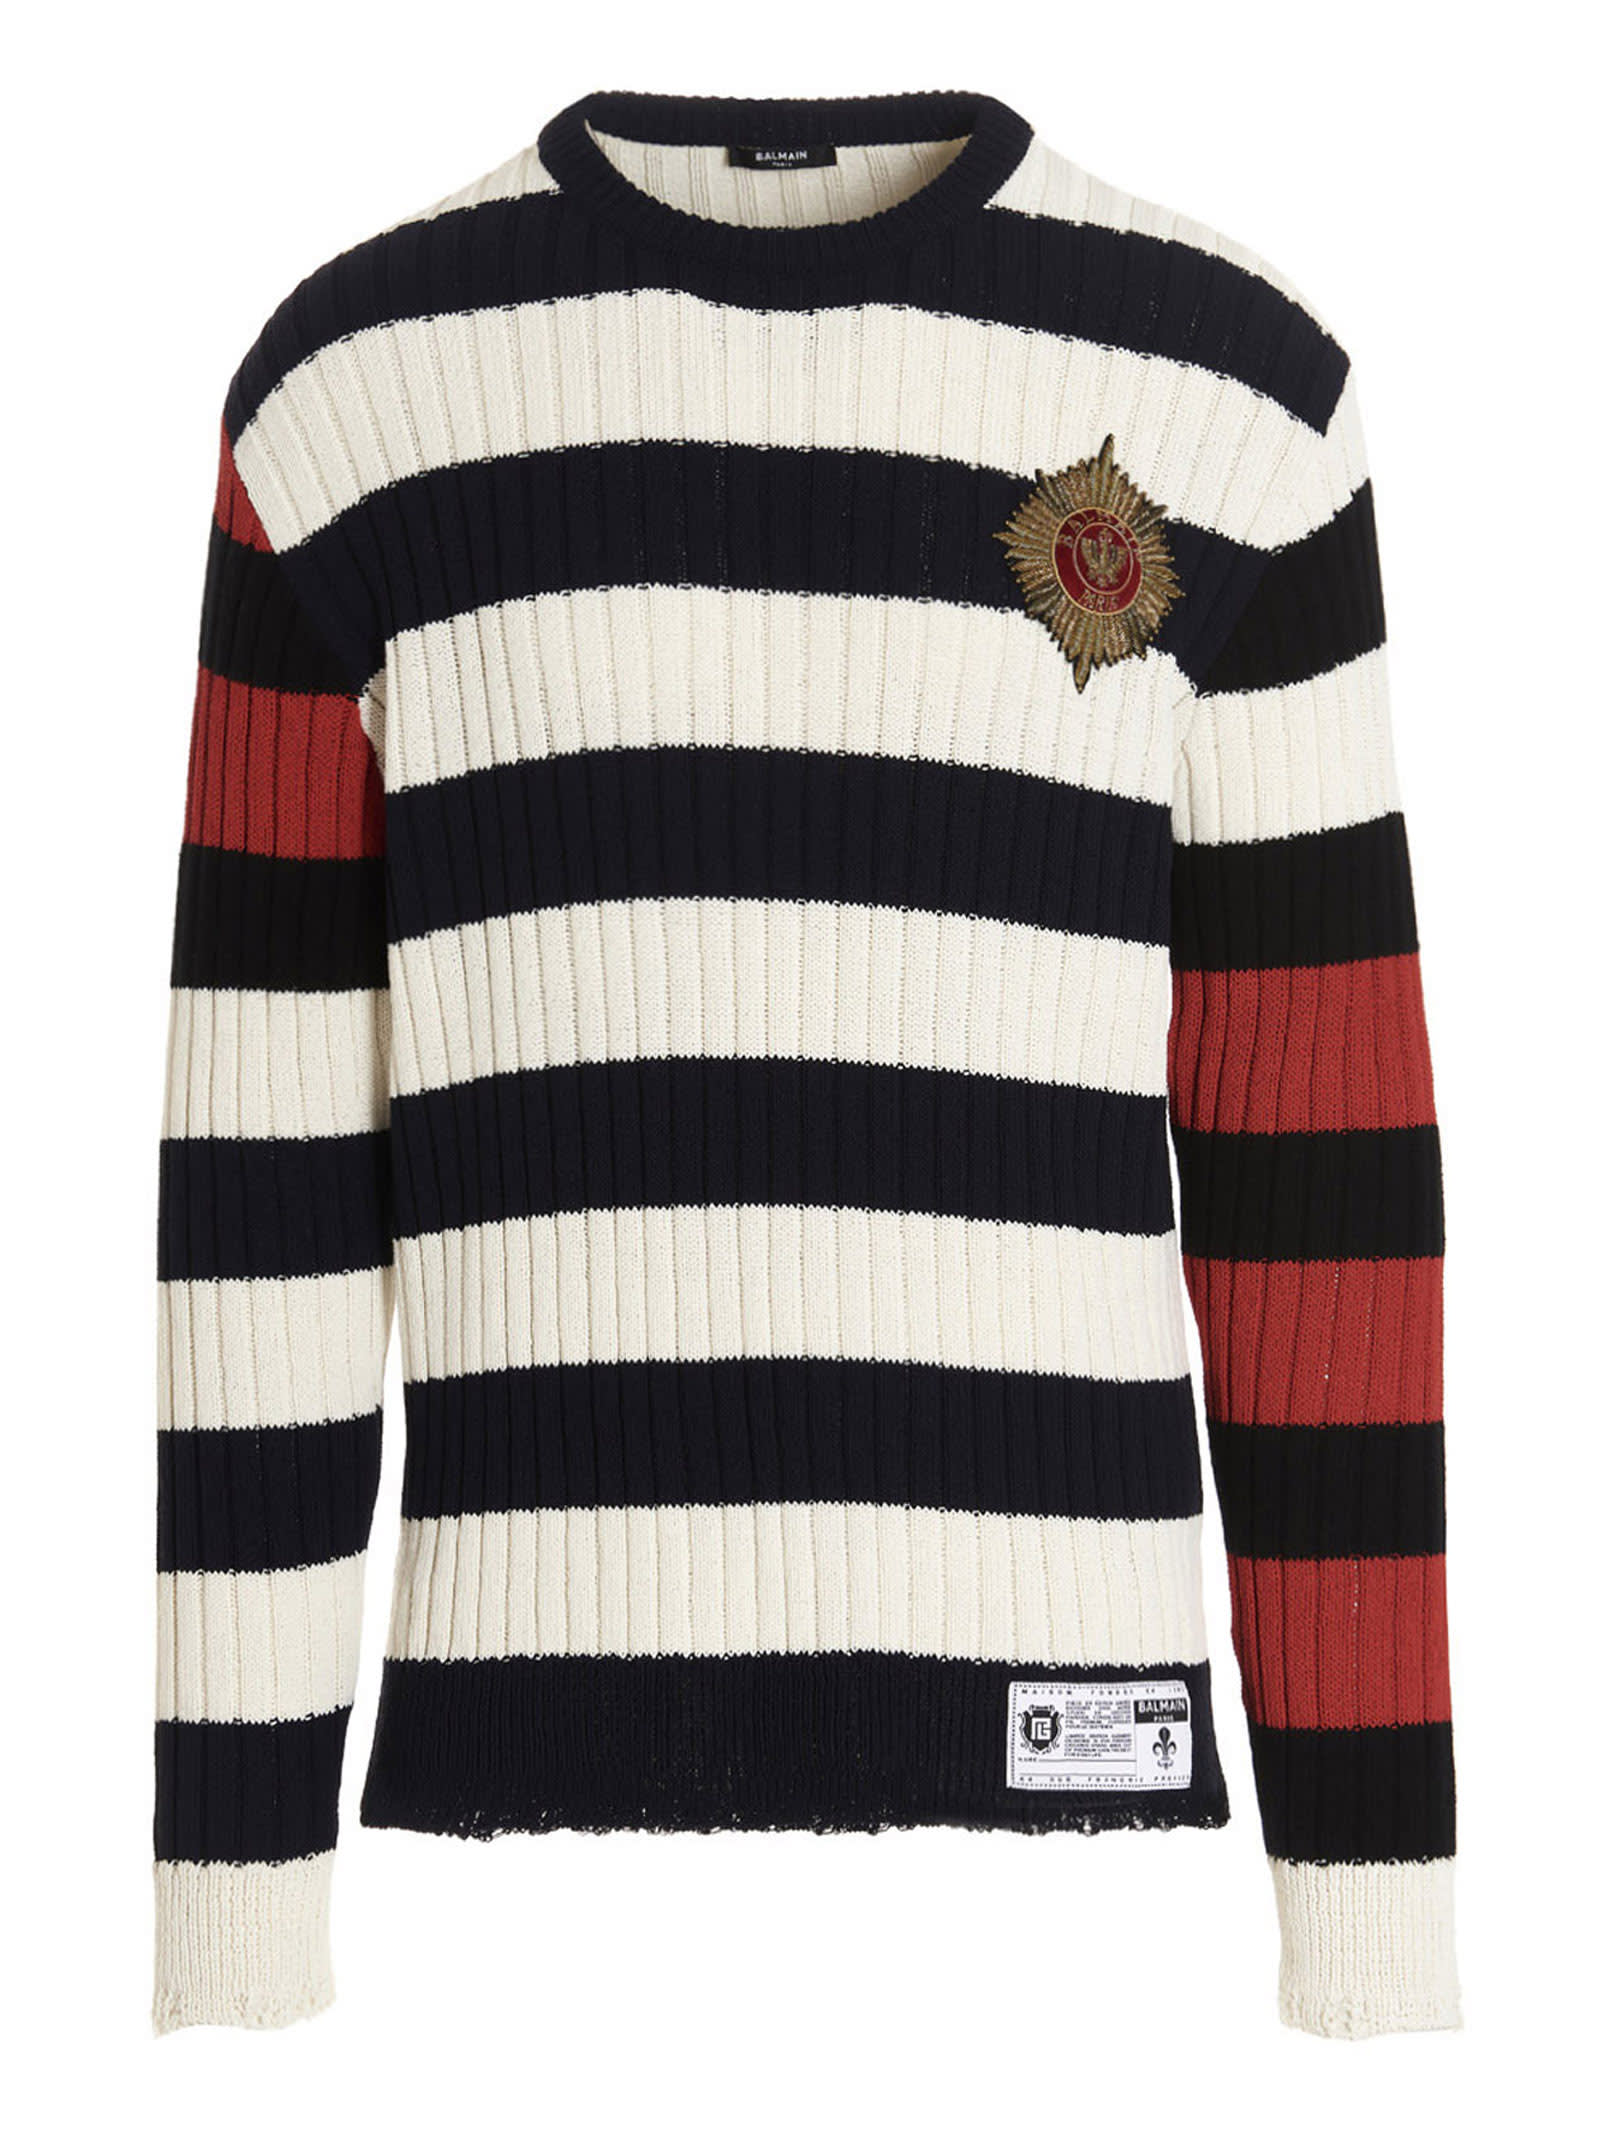 Balmain Chest Embroidery Sweater